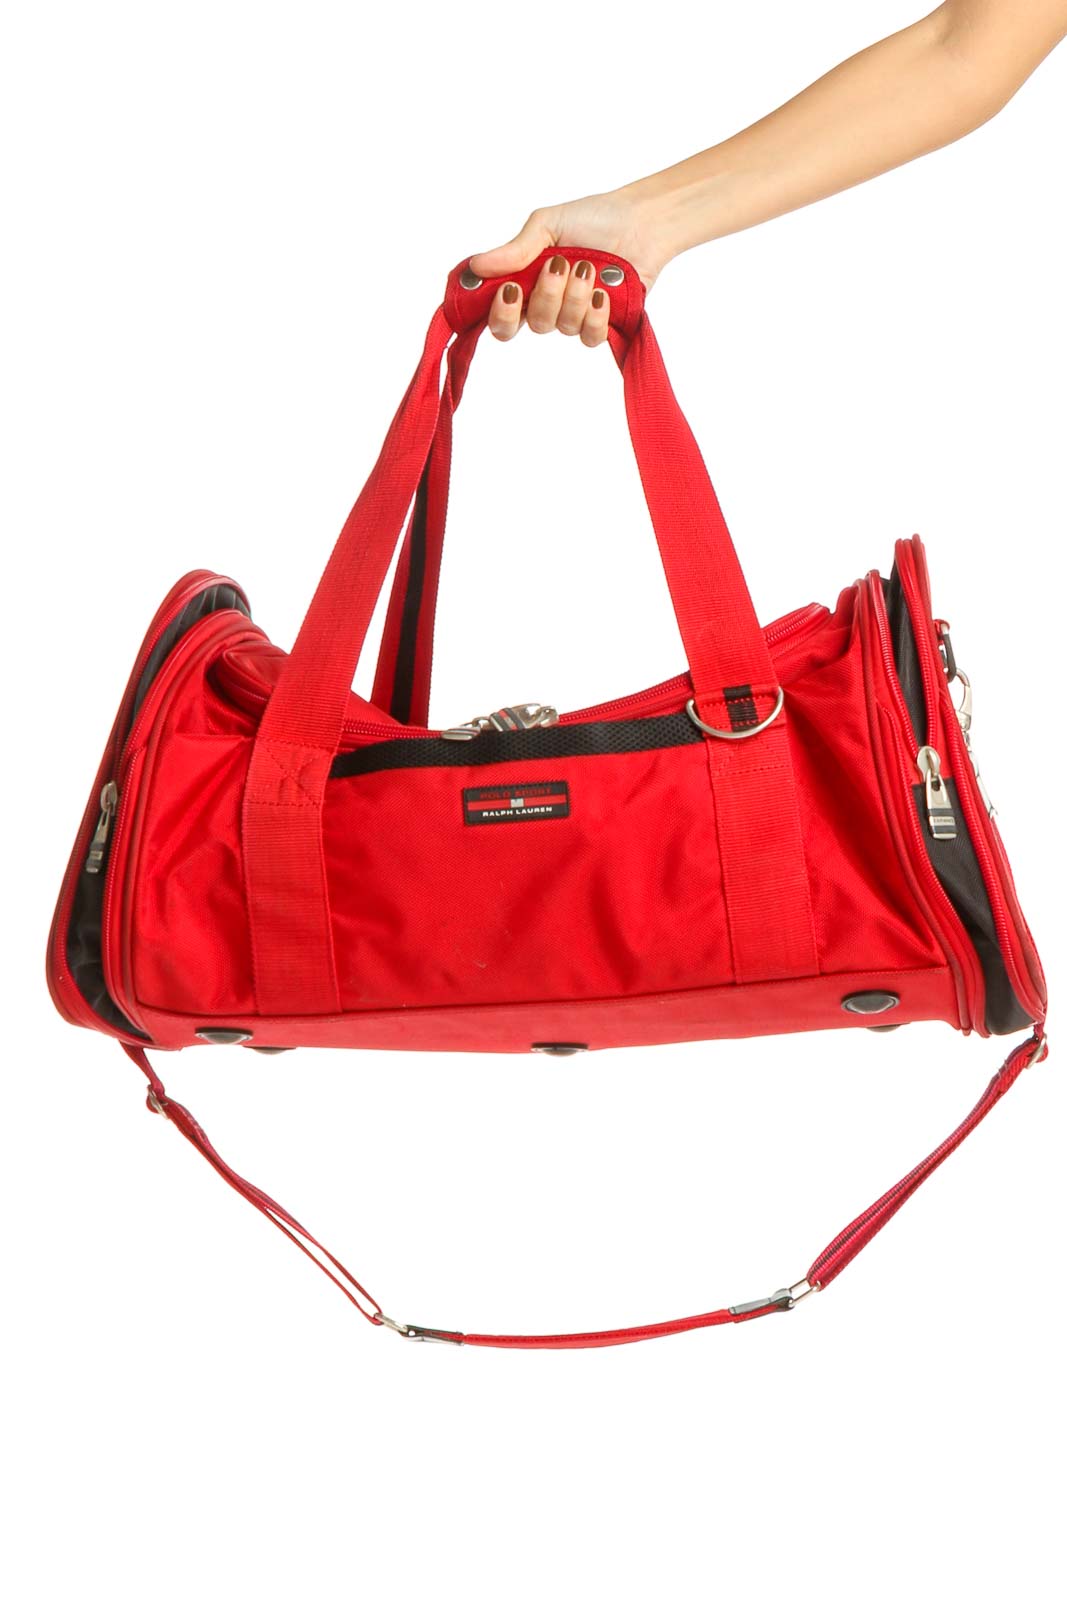 Red Duffle Bag Front